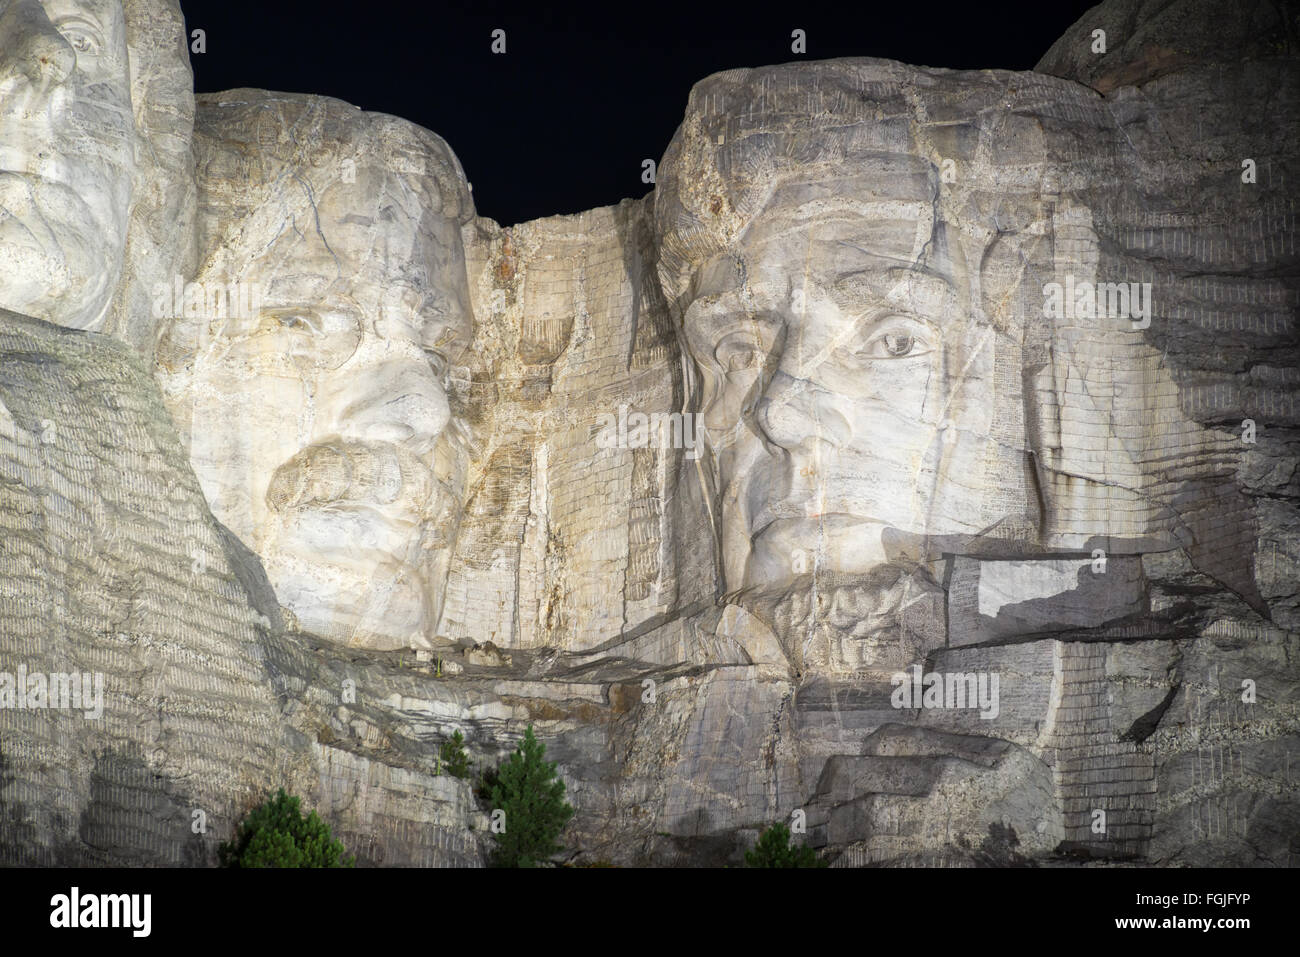 Mount Rushmore at night with Jefferson, Roosevelt, and Lincoln visible Stock Photo